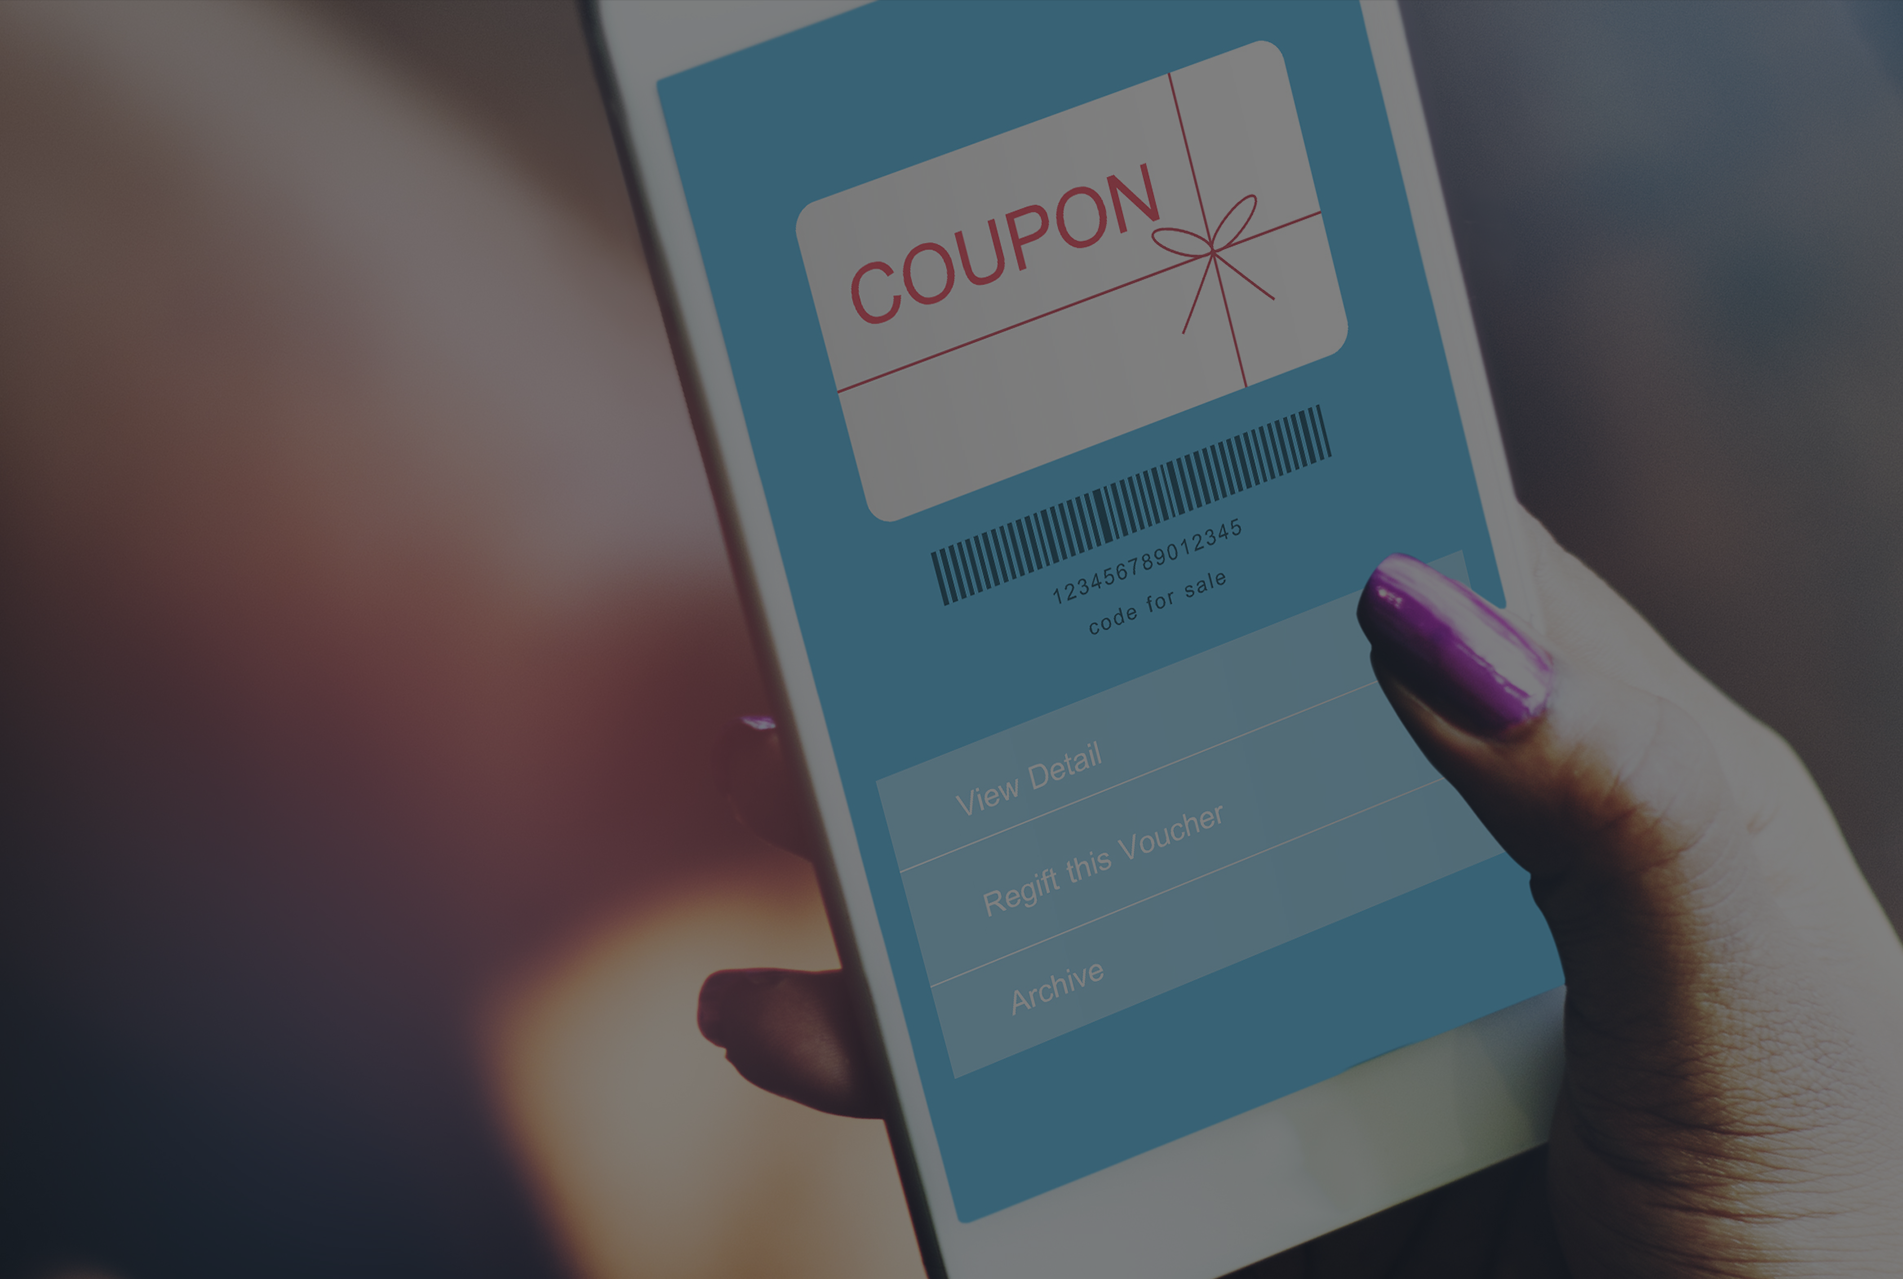 Coupon Management System